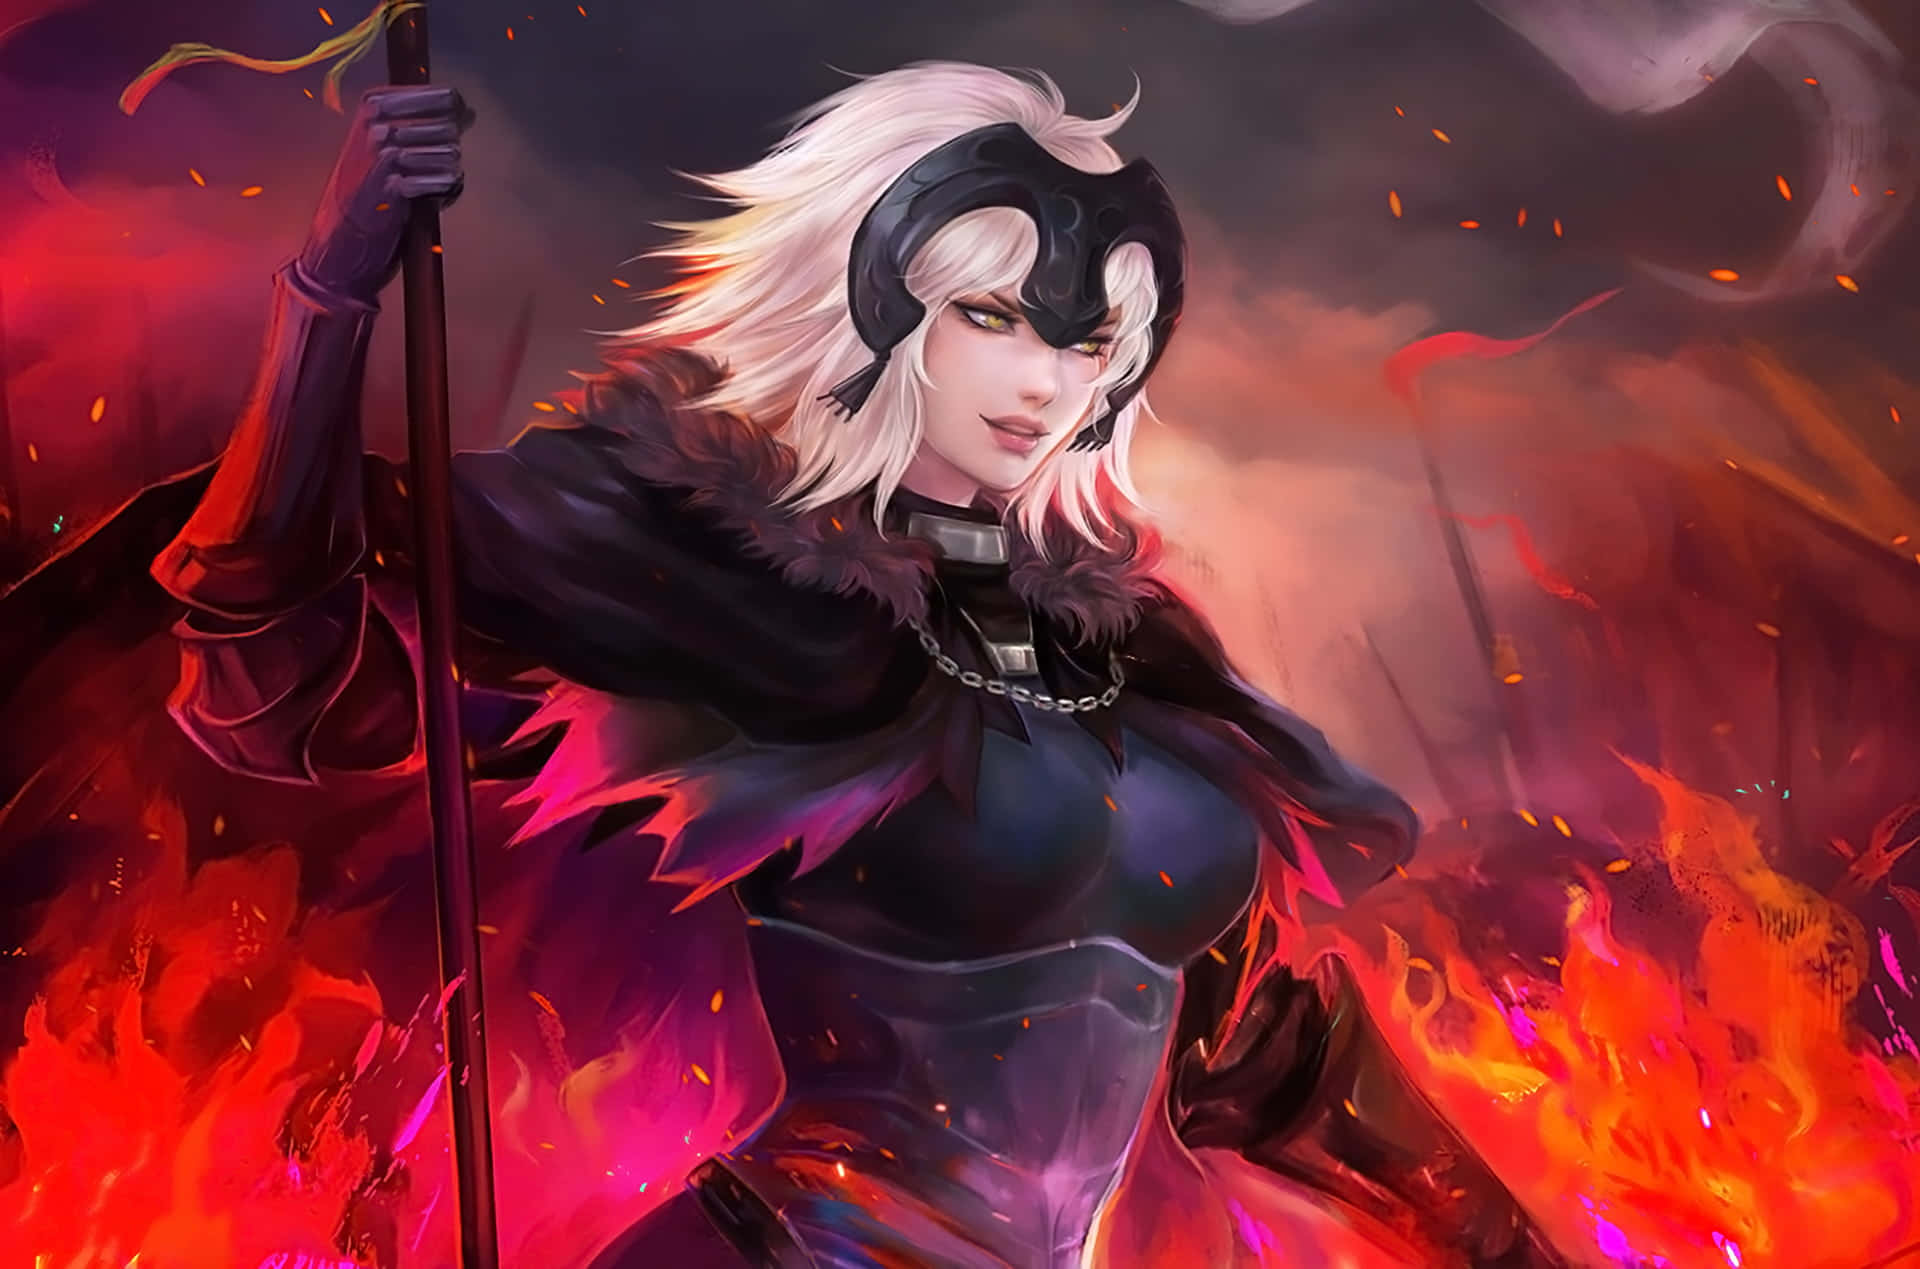 A Female Character With A Sword And Flames